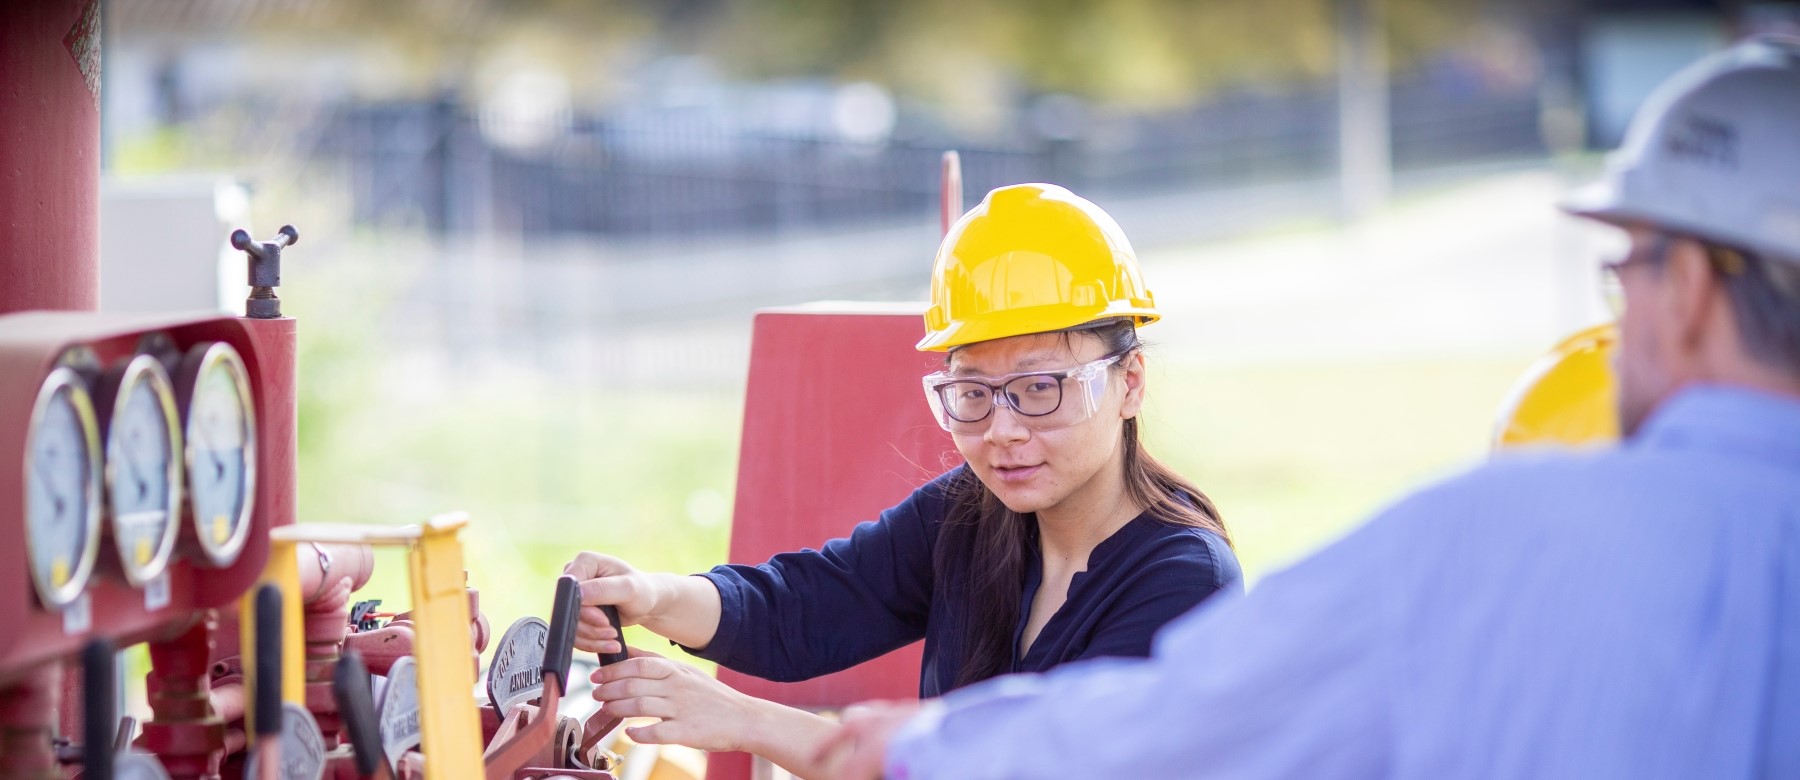 student with hard hat works on an engineering project